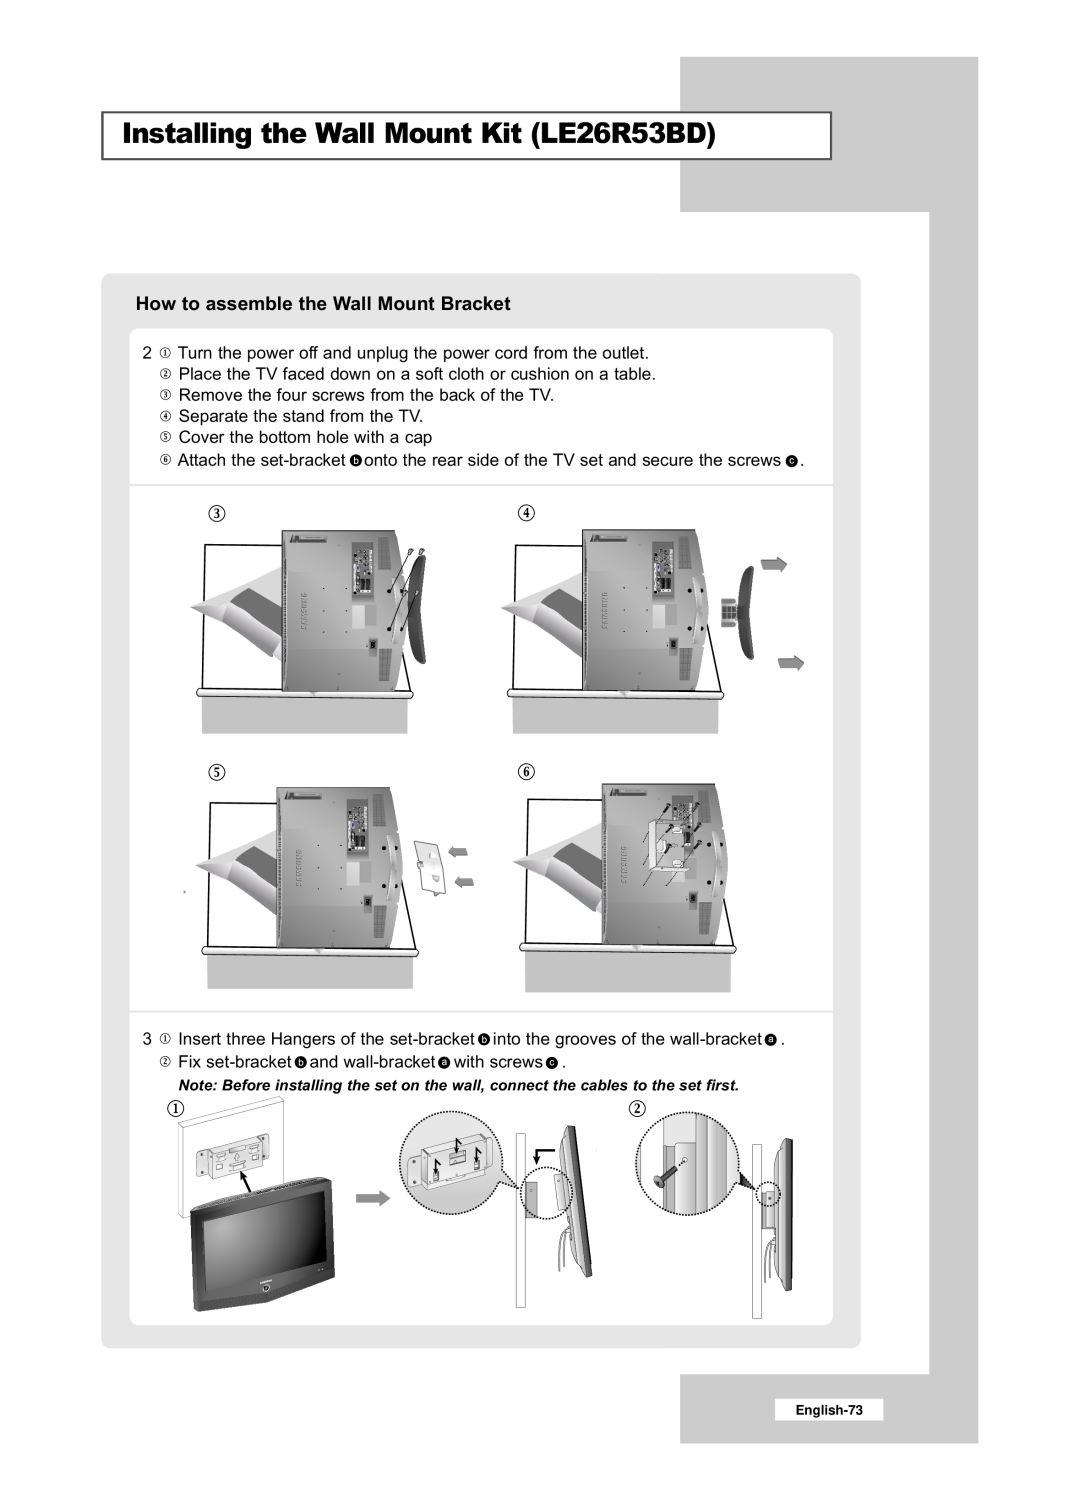 Samsung LE32R53BD manual Installing the Wall Mount Kit LE26R53BD, How to assemble the Wall Mount Bracket 